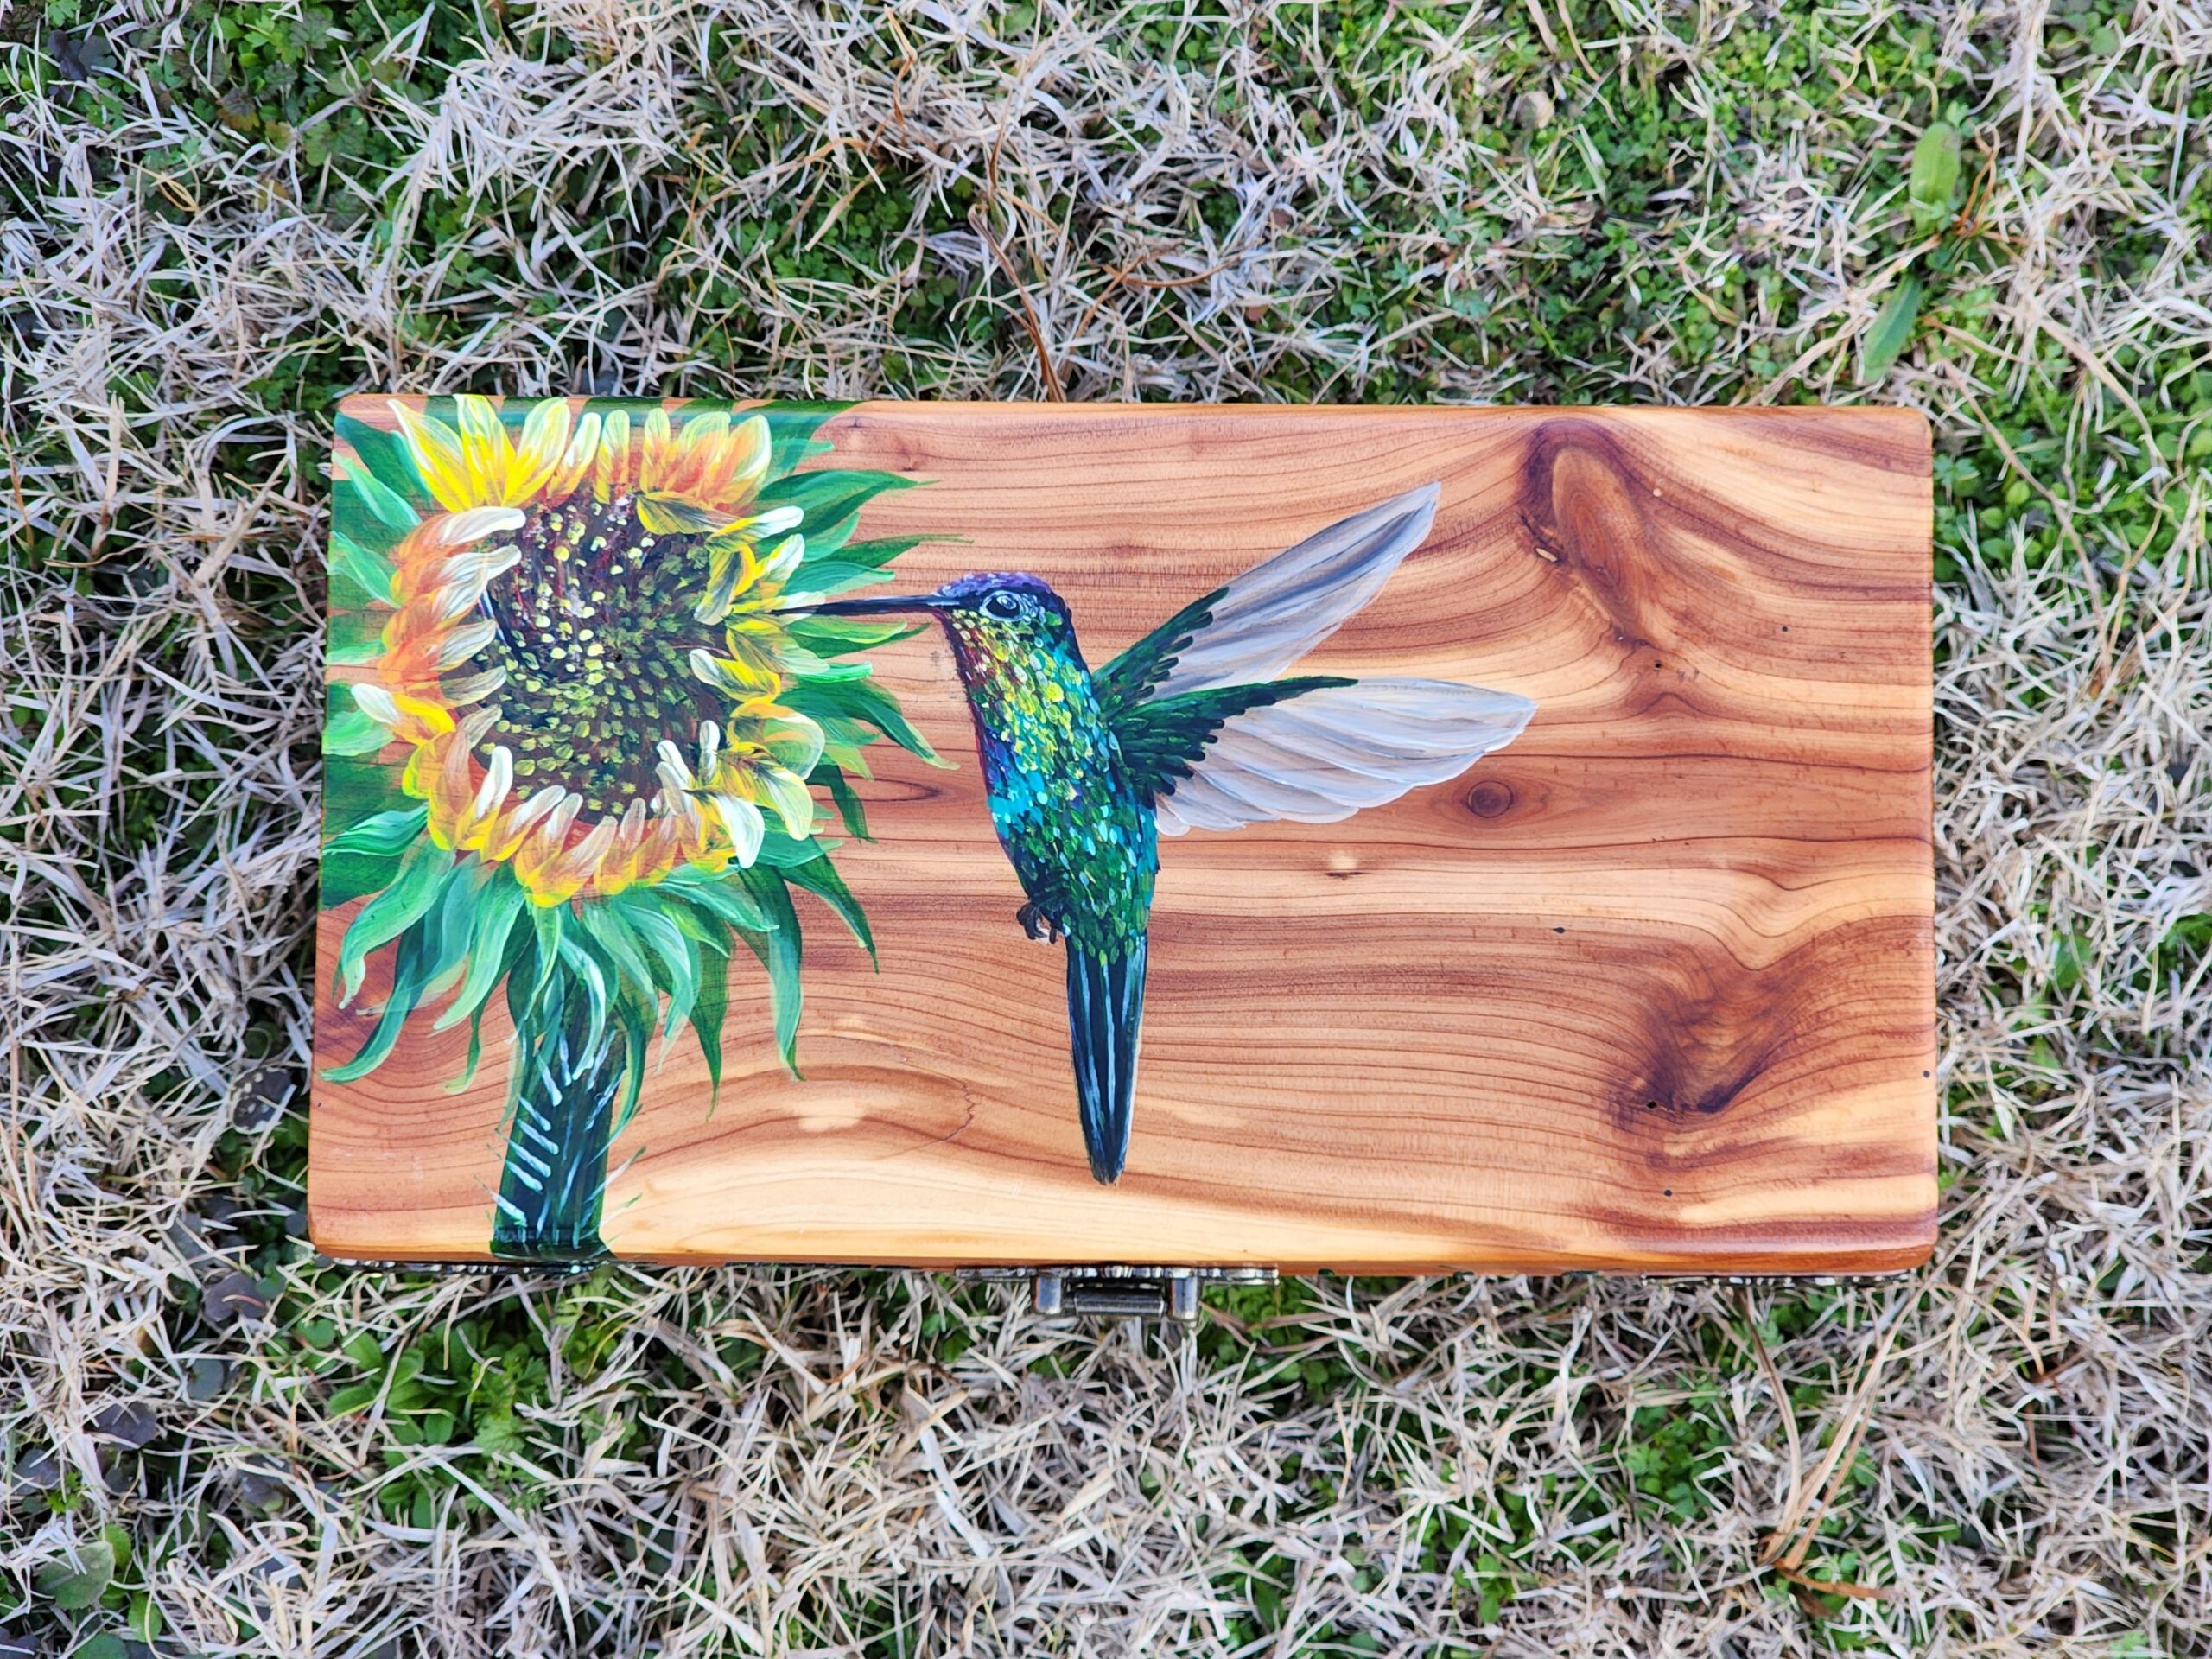 Repurposed antique wooden jewelry box. Handpainted design of a sunflower with a hummingbird. Antique bronze plated clasps and brass corner decorations.